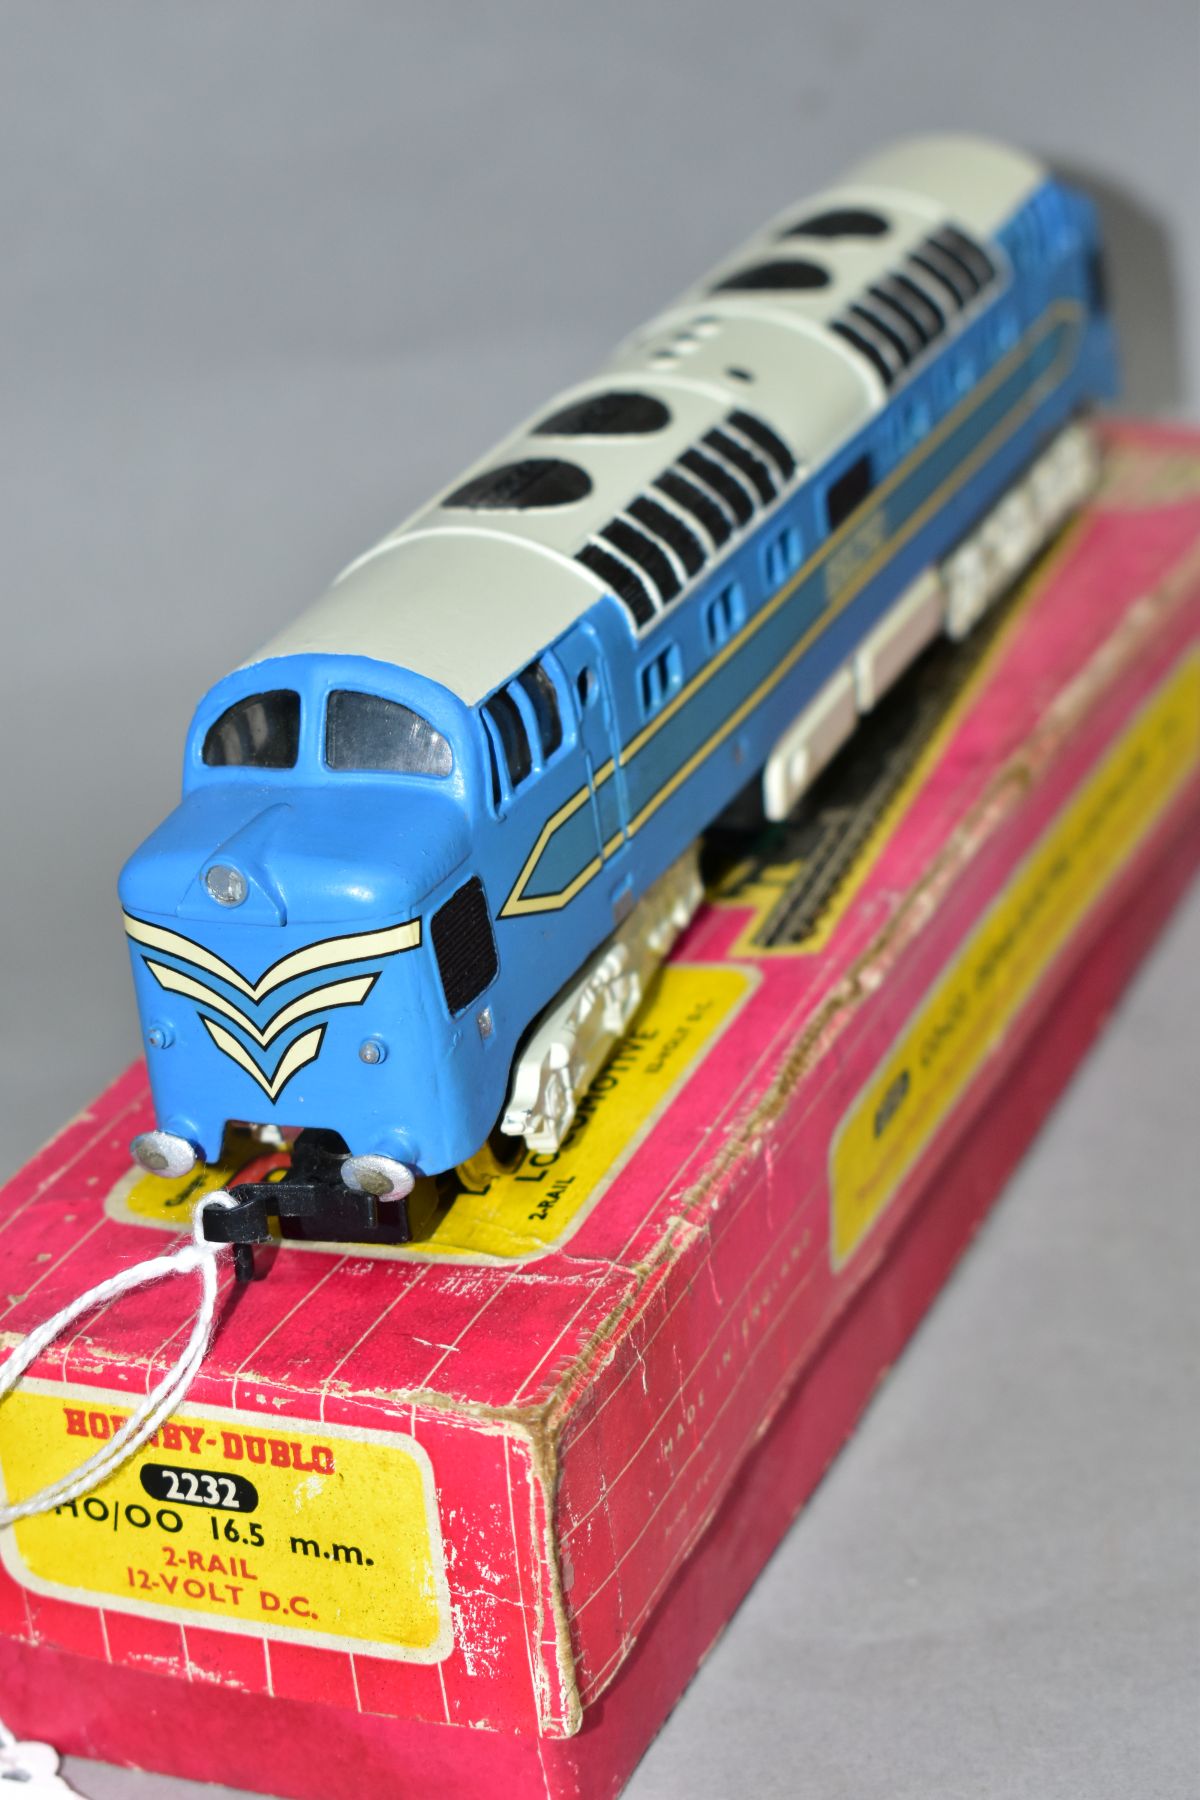 A BOXED HORNBY DUBLO CLASS 55 DELTIC LOCOMOTIVE, has been modified and repainted to represent the - Image 2 of 3